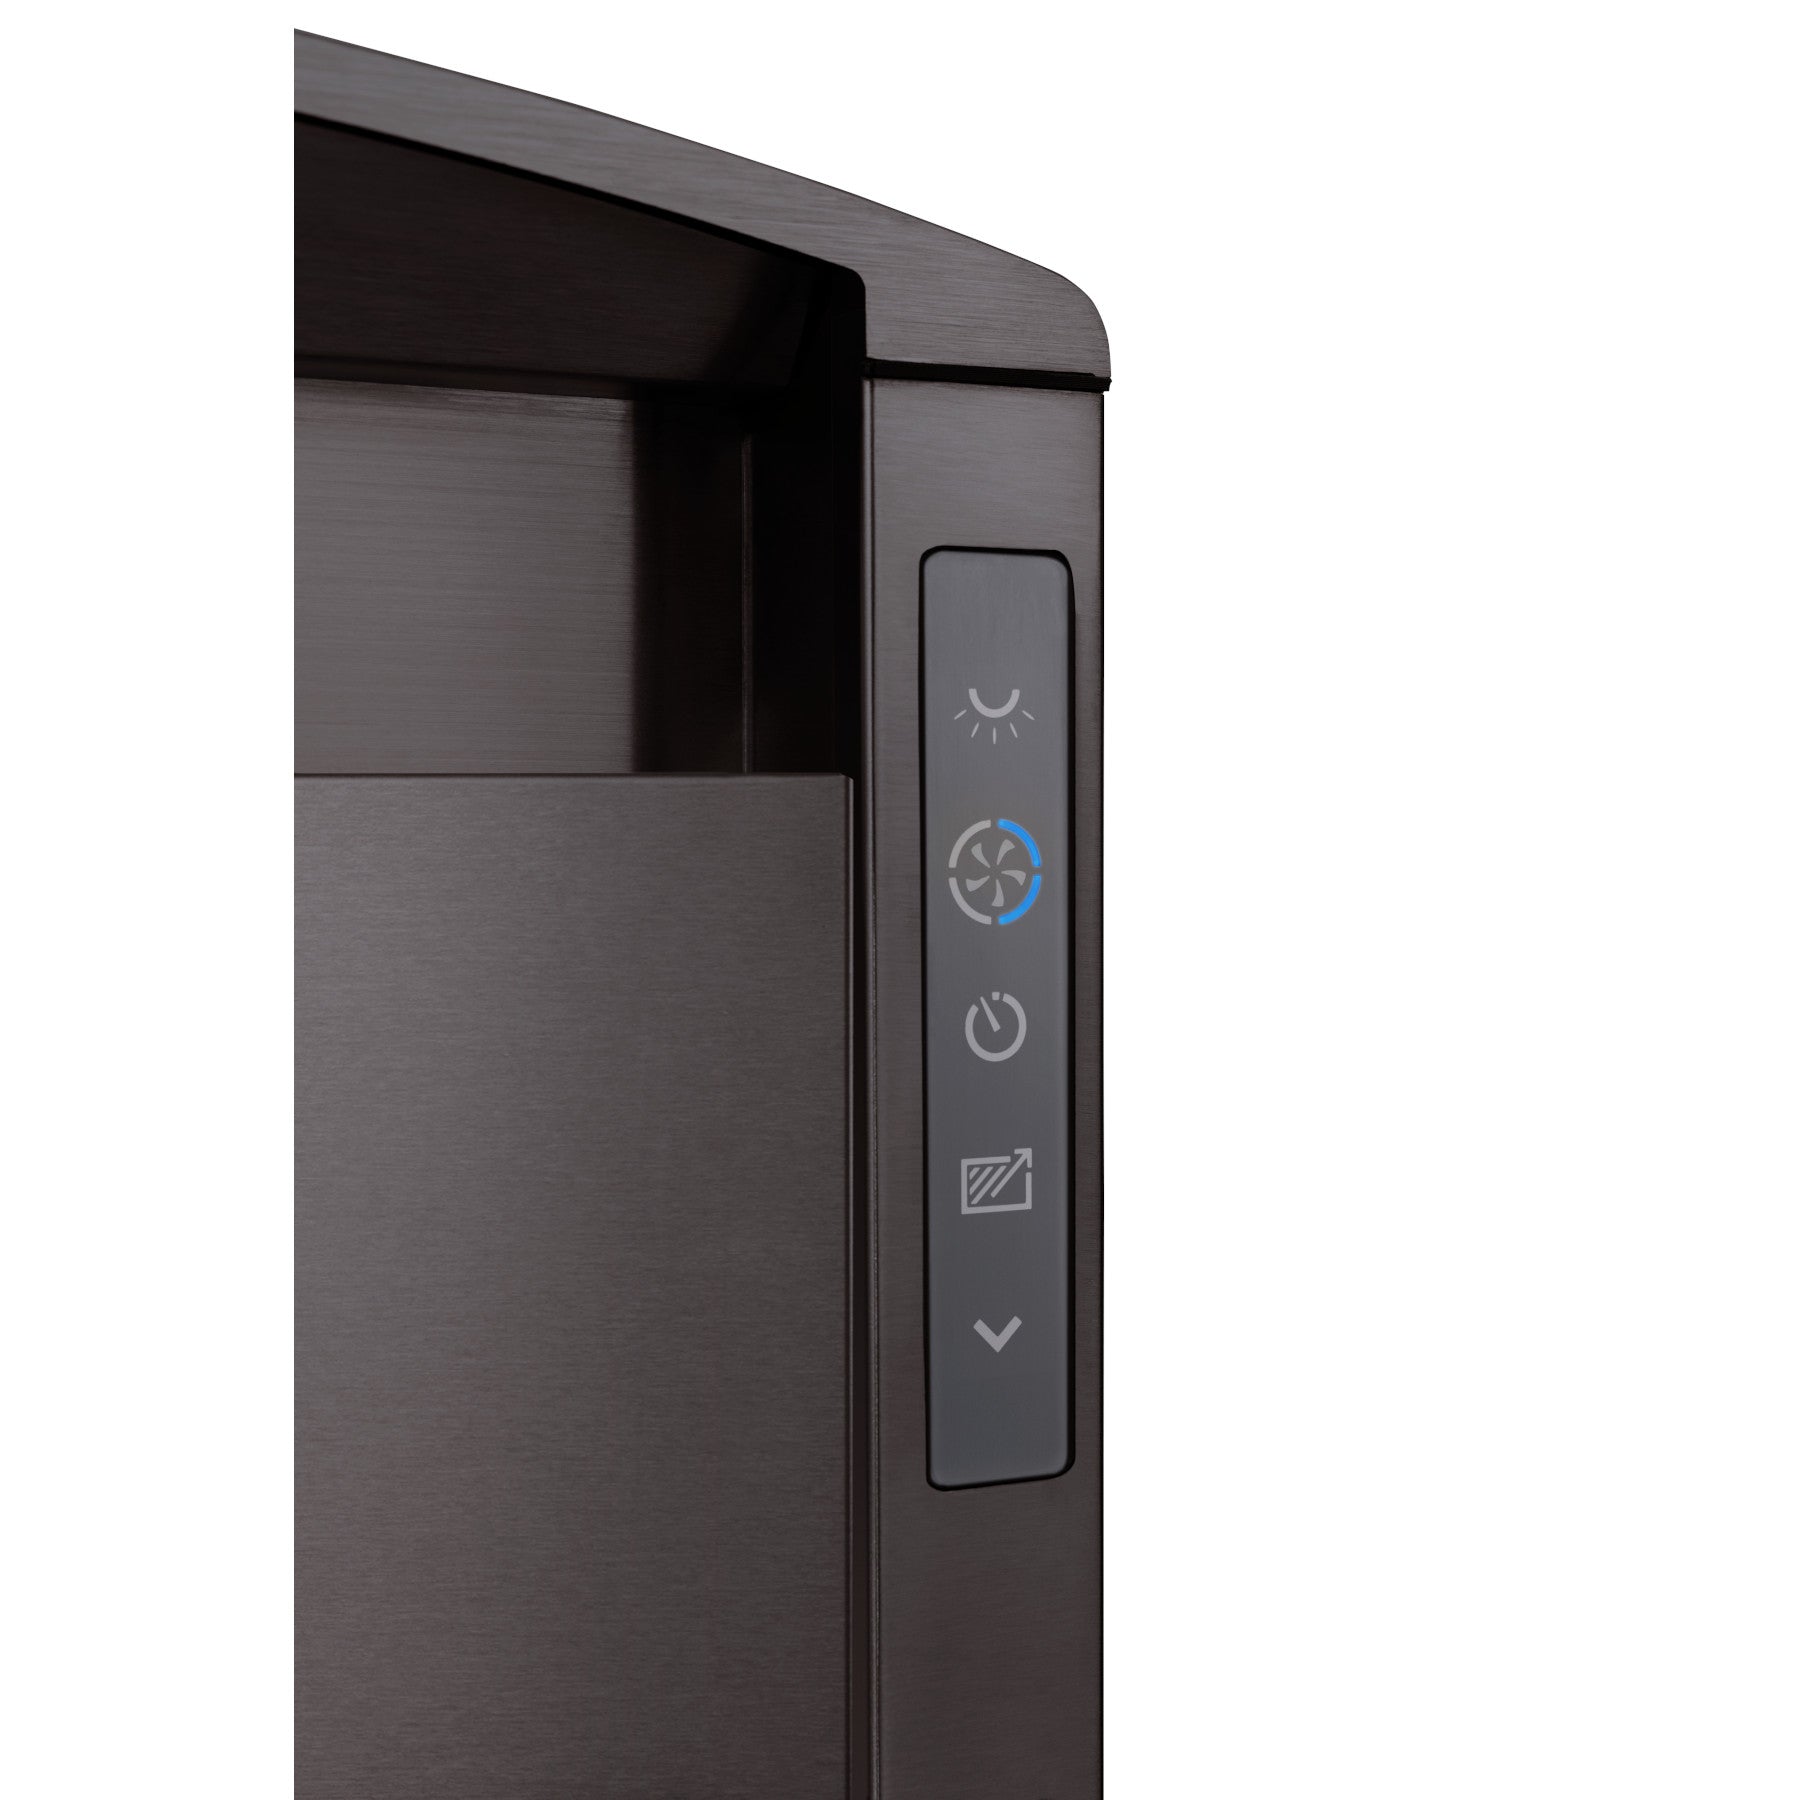 Best - 36 Inch Downdraft Vent in Black Stainless - D49M36BLS